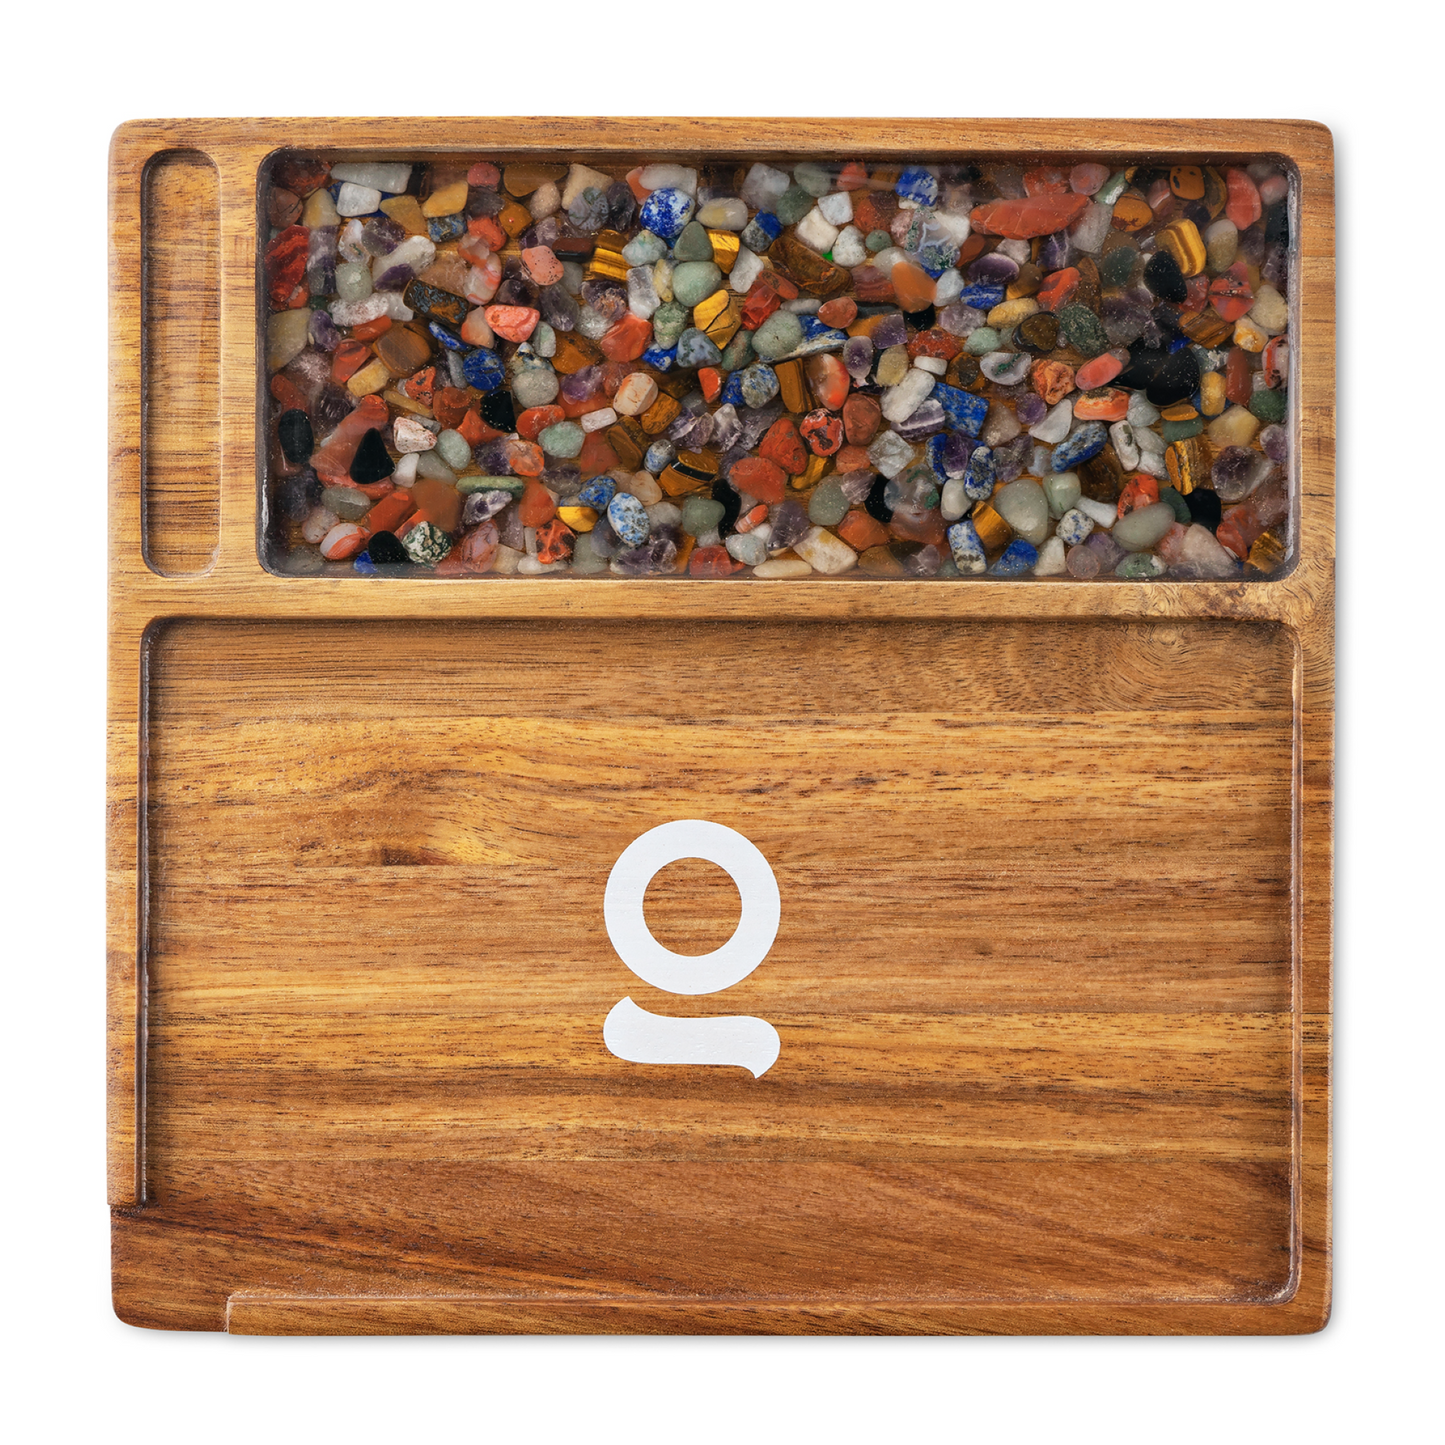 Ongrok Acacia Wood Rolling Tray (9.5 x 9.5) by Ongrok | Mission Dispensary